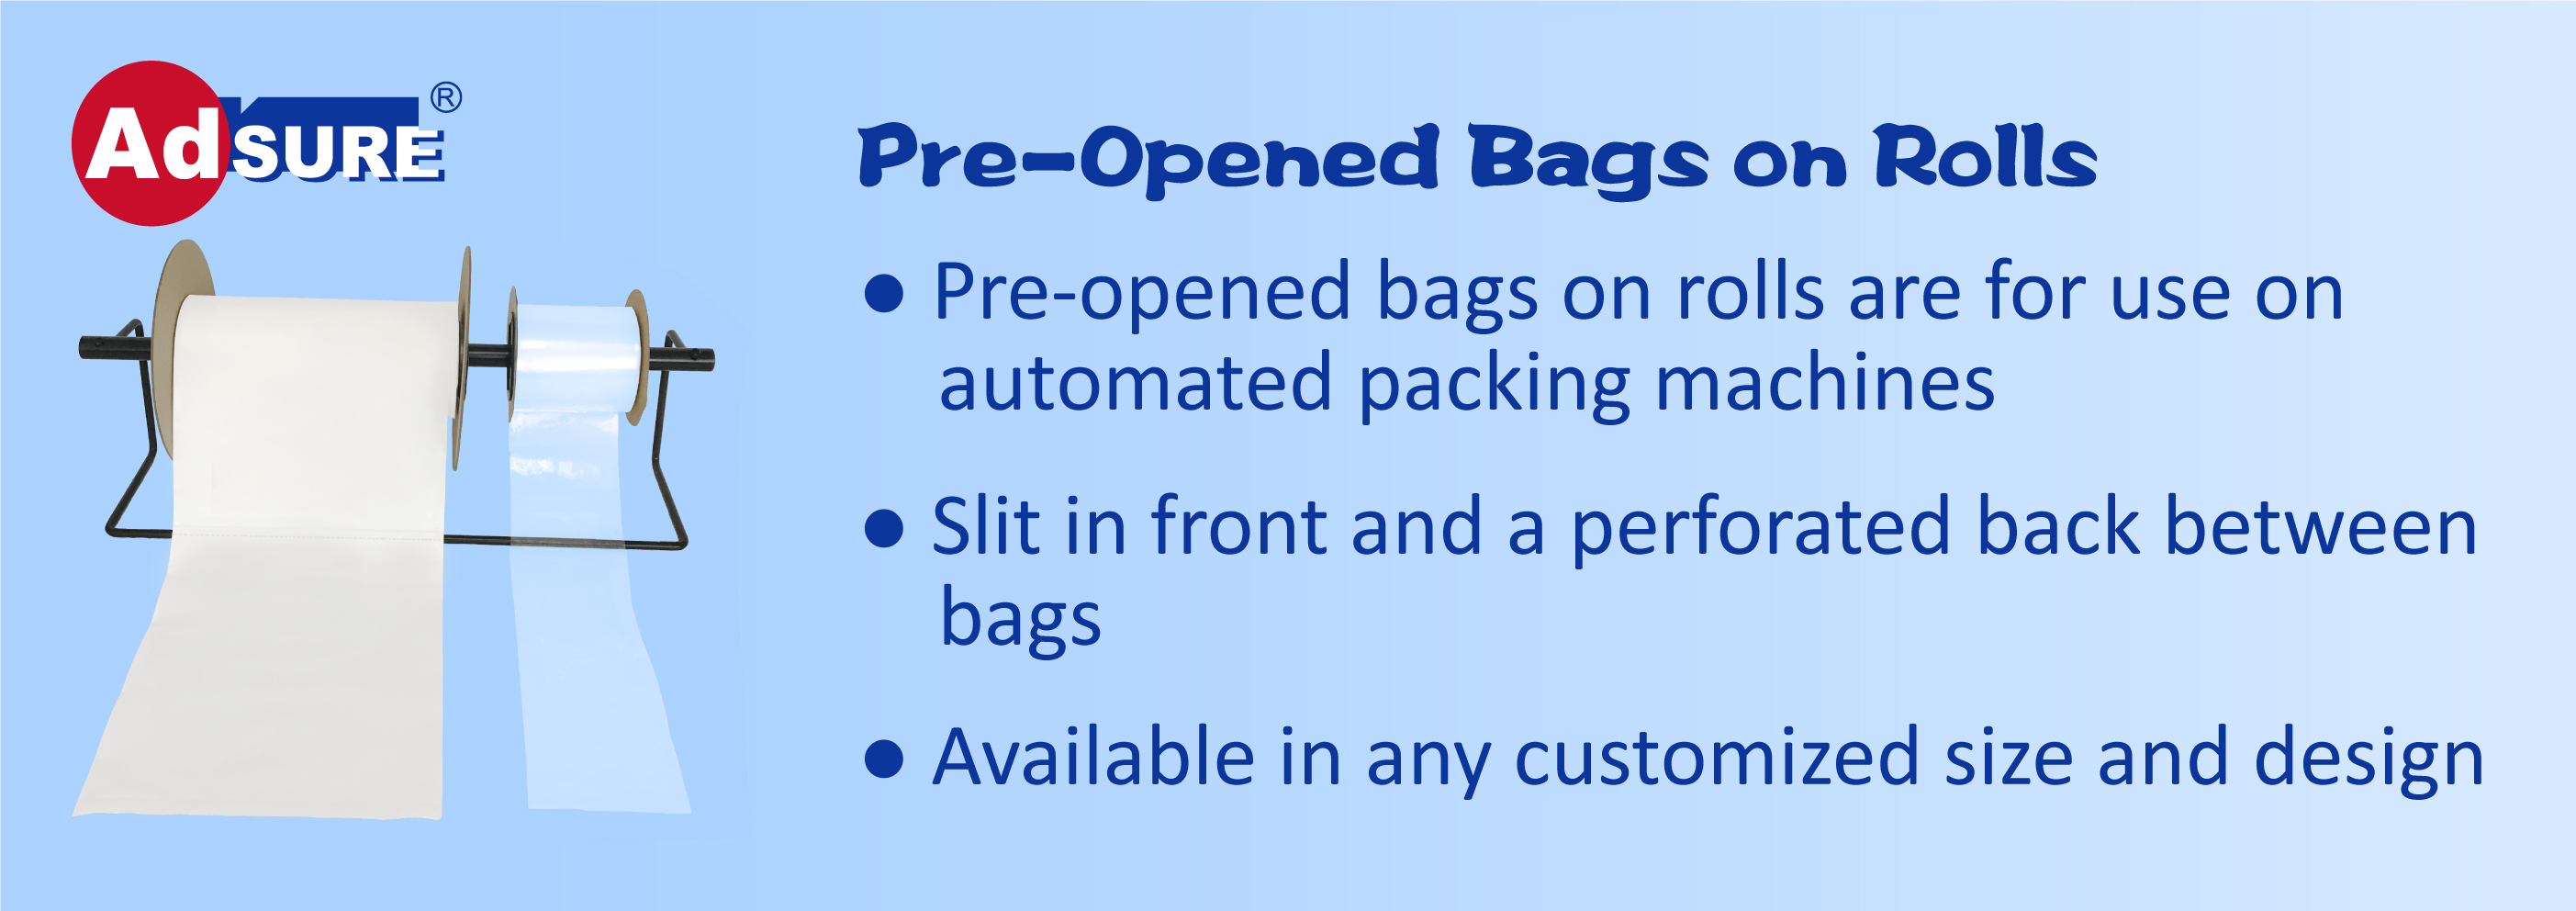 Feature of Auto Pre Opened Bags on Rolls